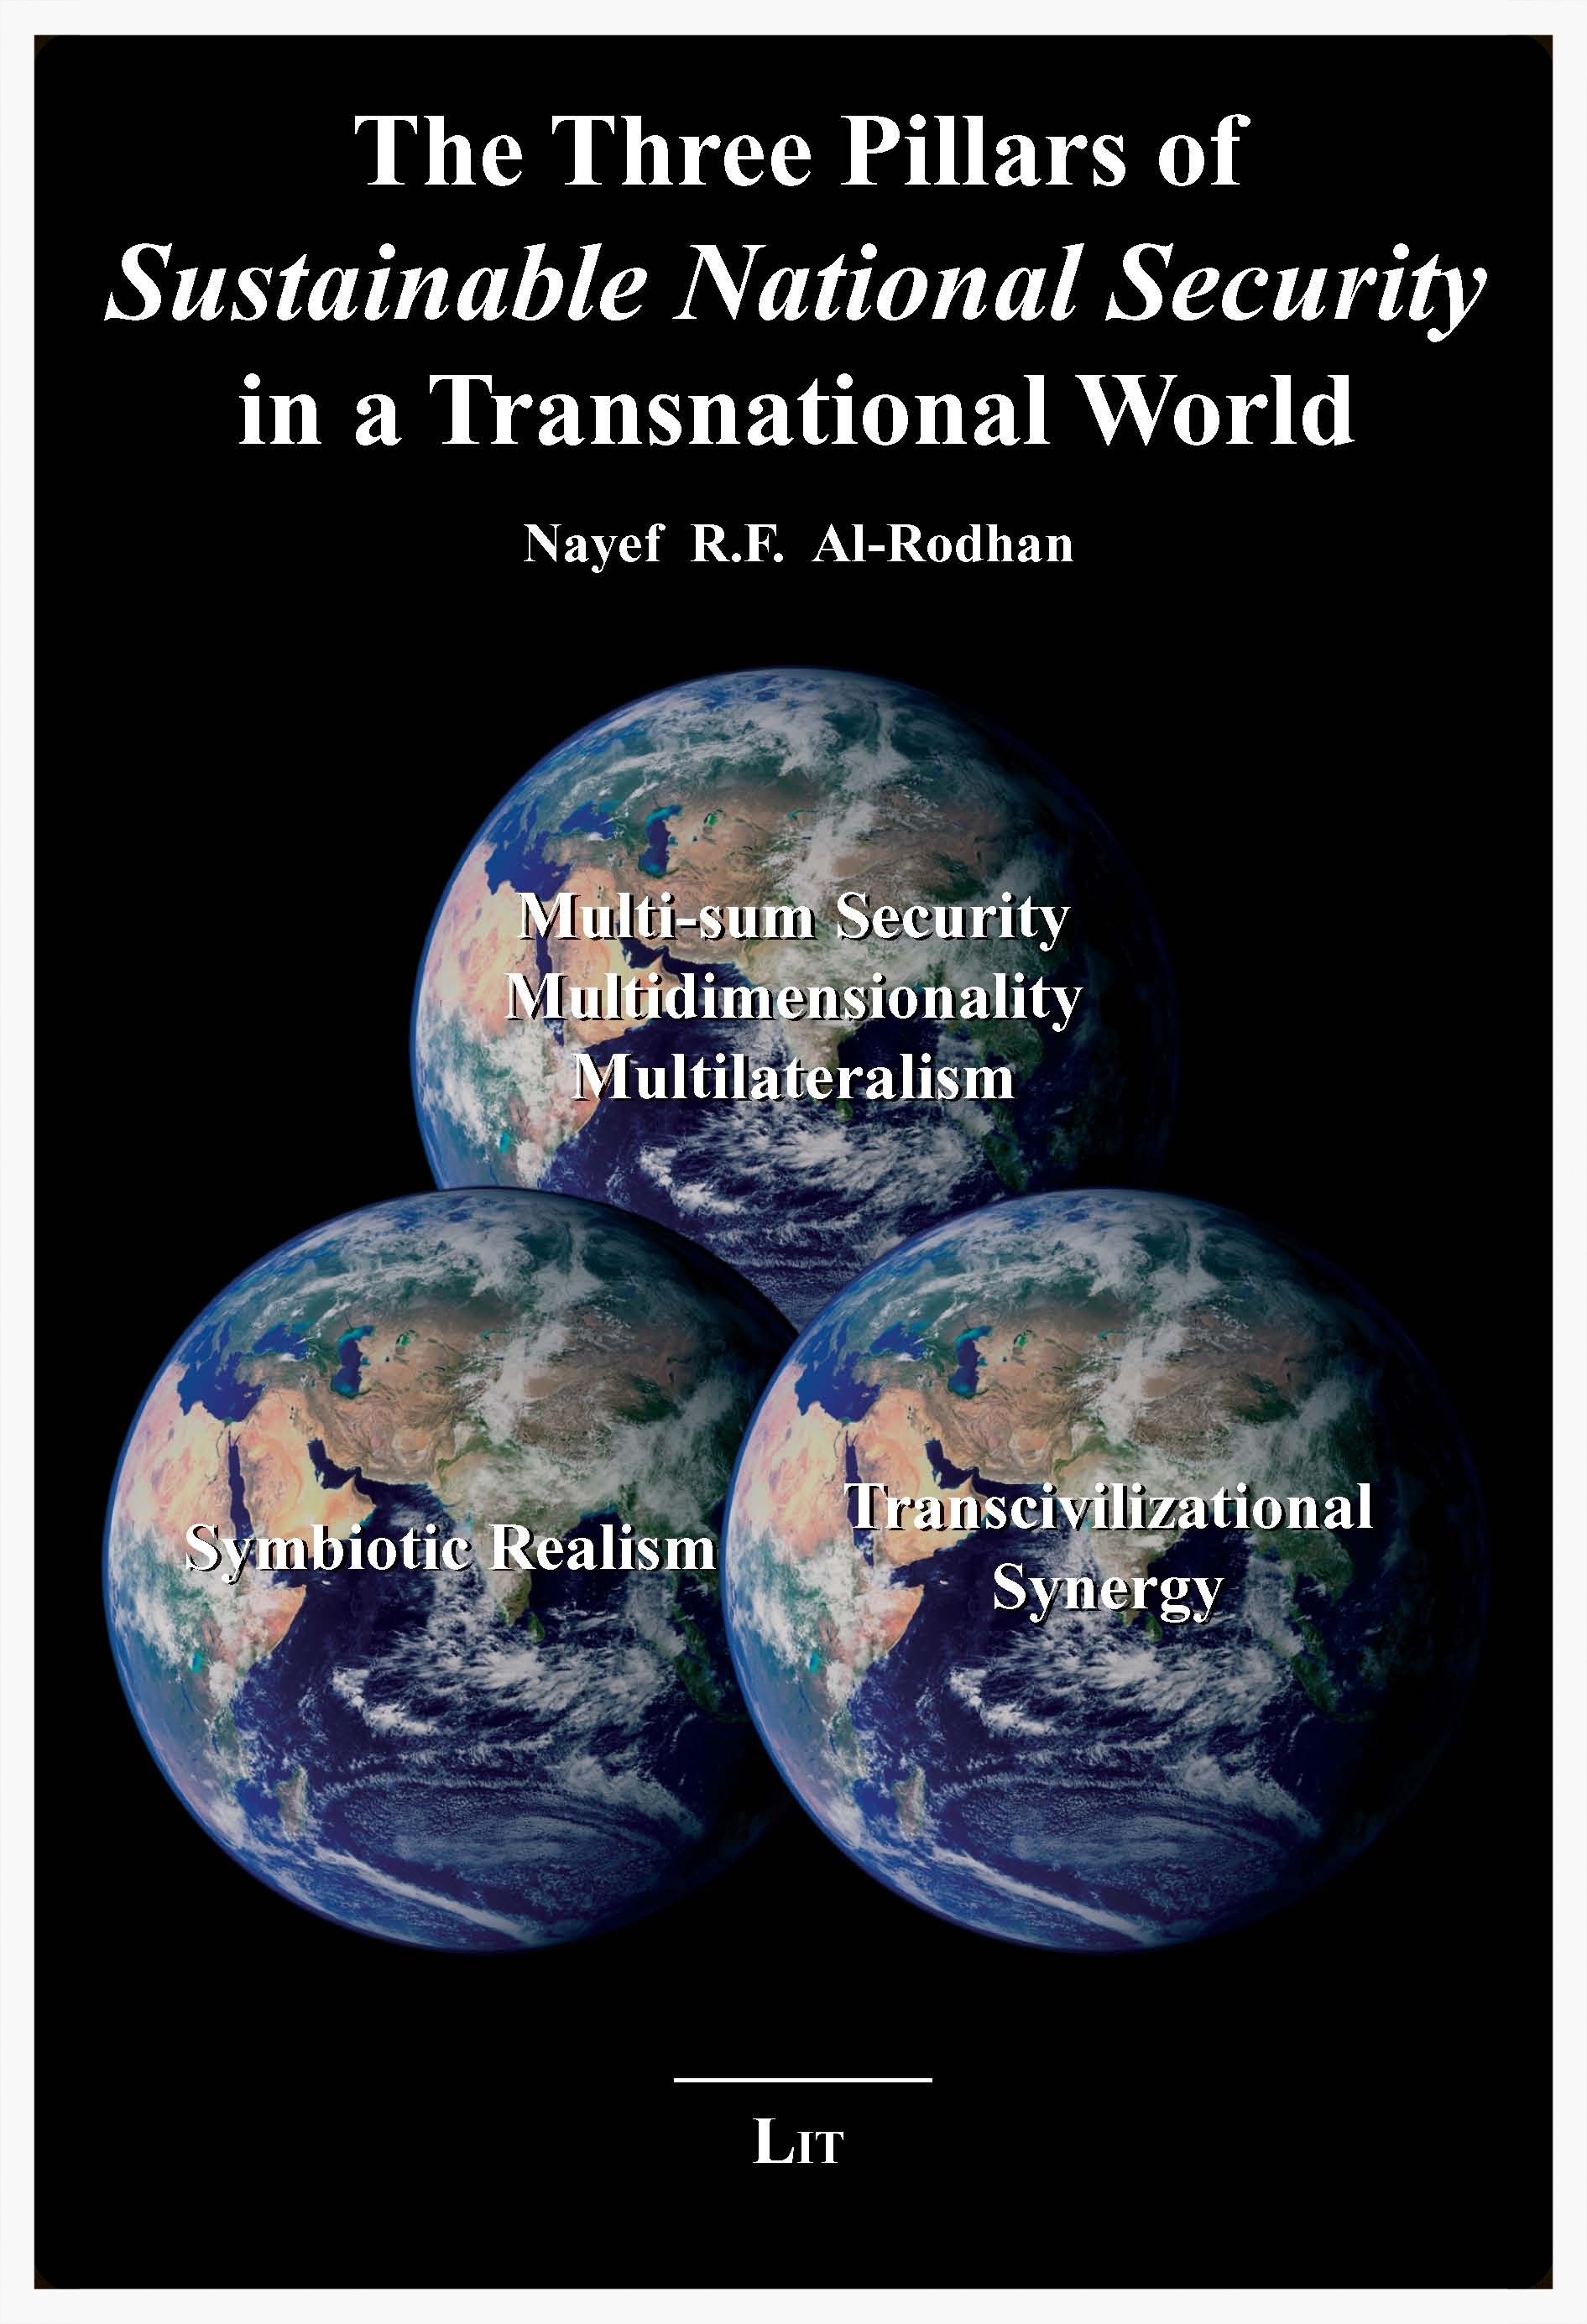 THE THREE PILLARS OF SUSTAINABLE NATIONAL SECURITY IN A TRANSNATIONAL WORLD